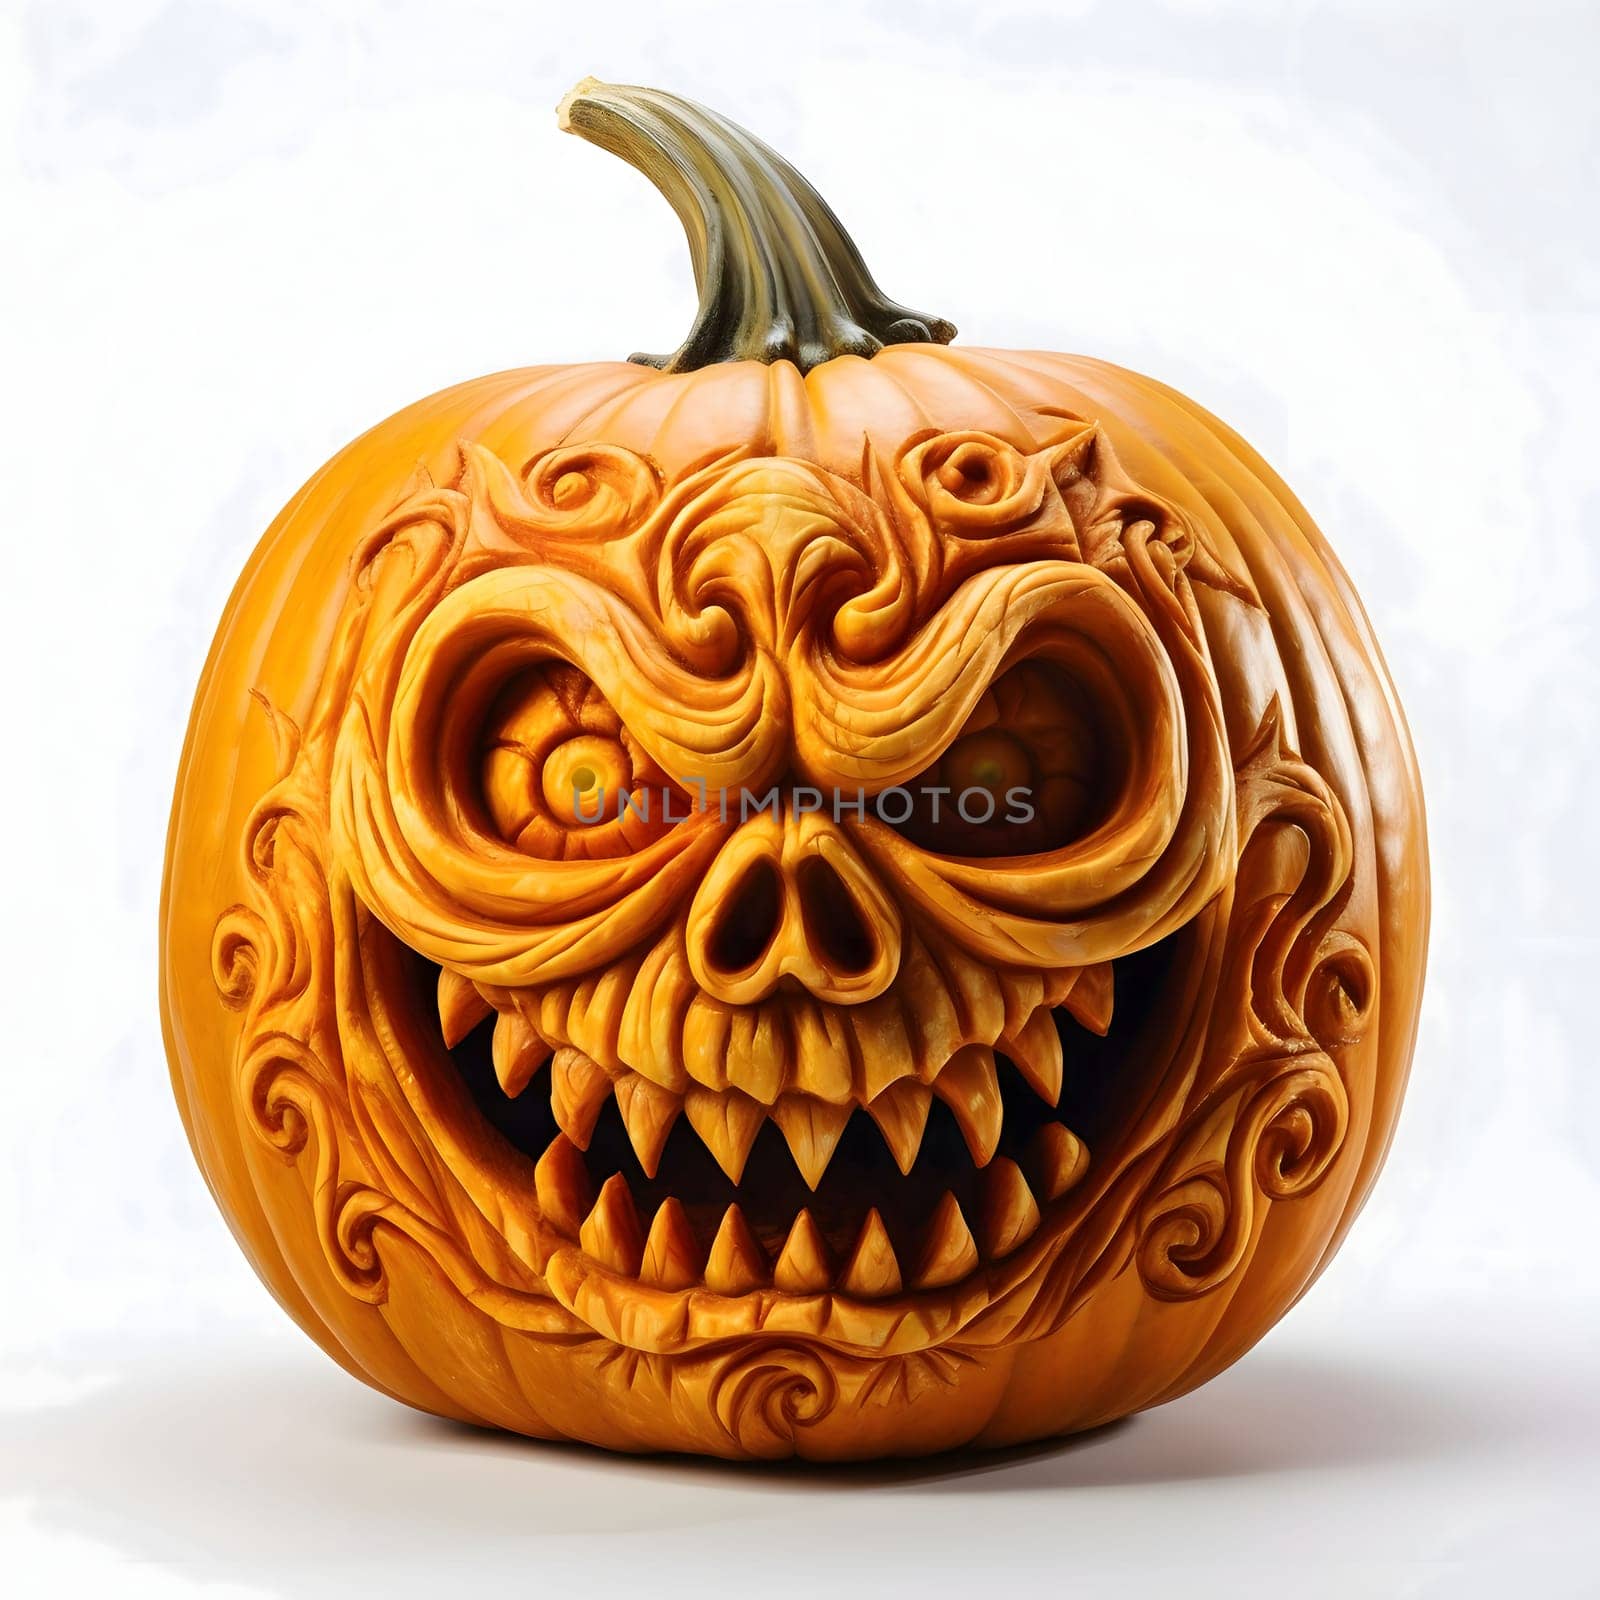 A sinister pumpkin with big teeth and shaken eyes, Halloween image on a white isolated background. Atmosphere of darkness and fear.